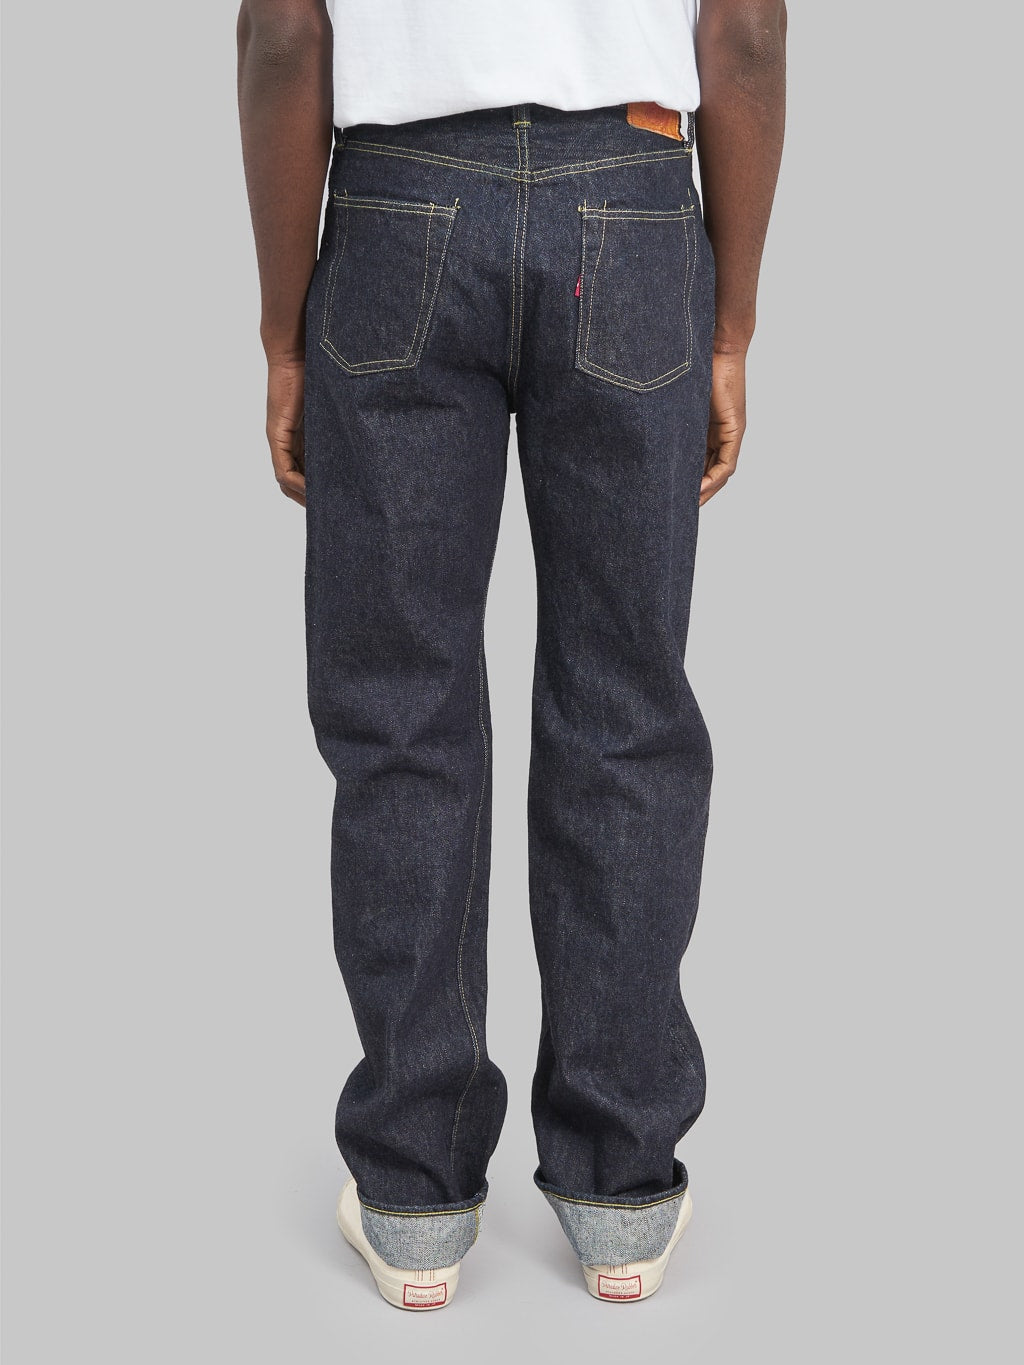 tcb s40s regular straight jeans back fit